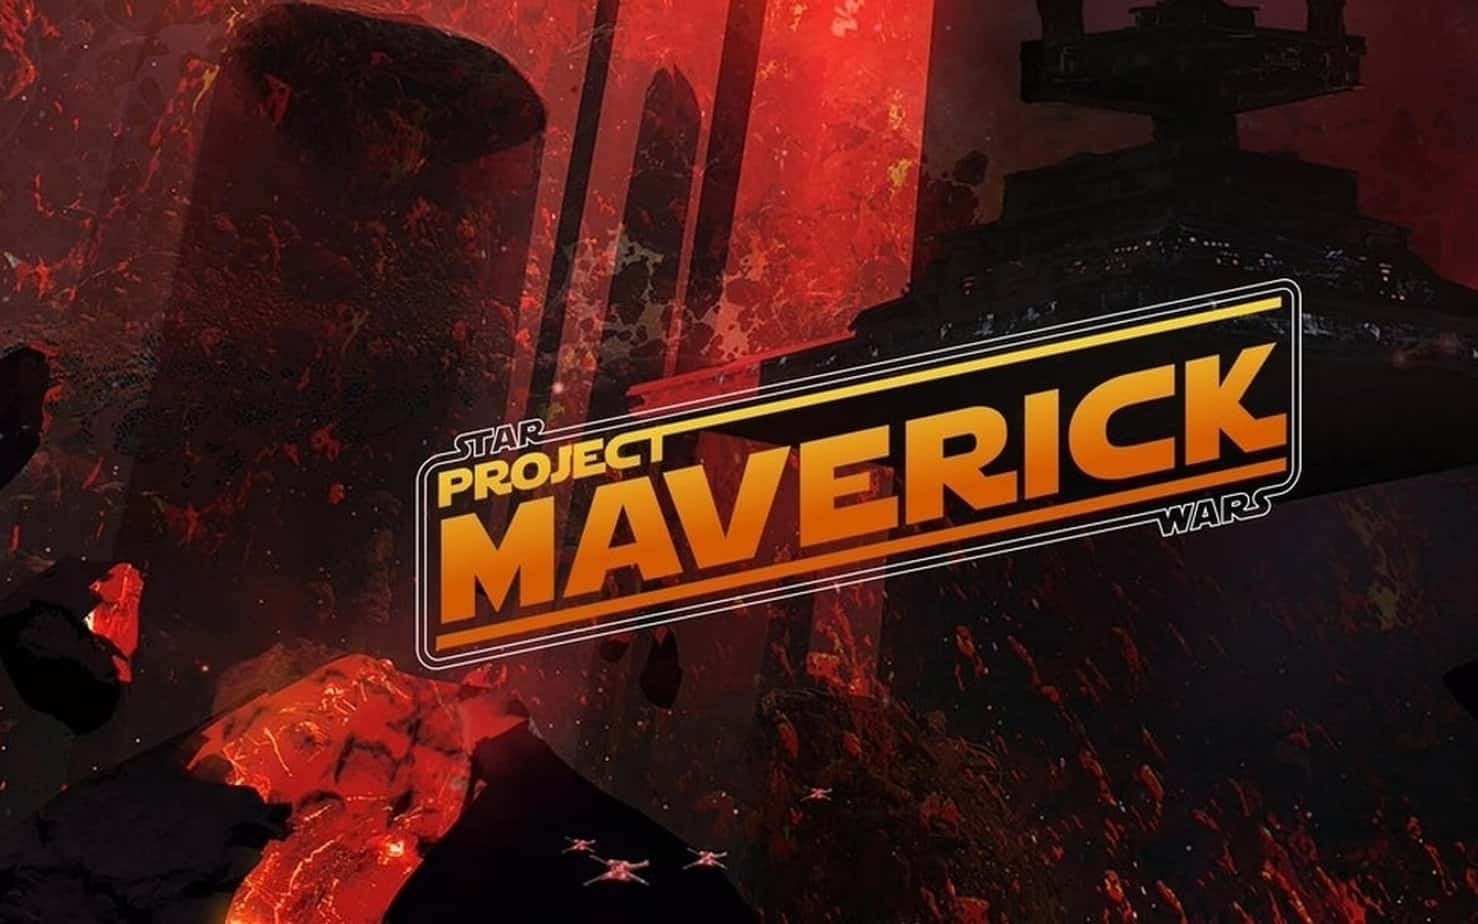 Star Wars Project Maverick game seems to have leaked on PSN